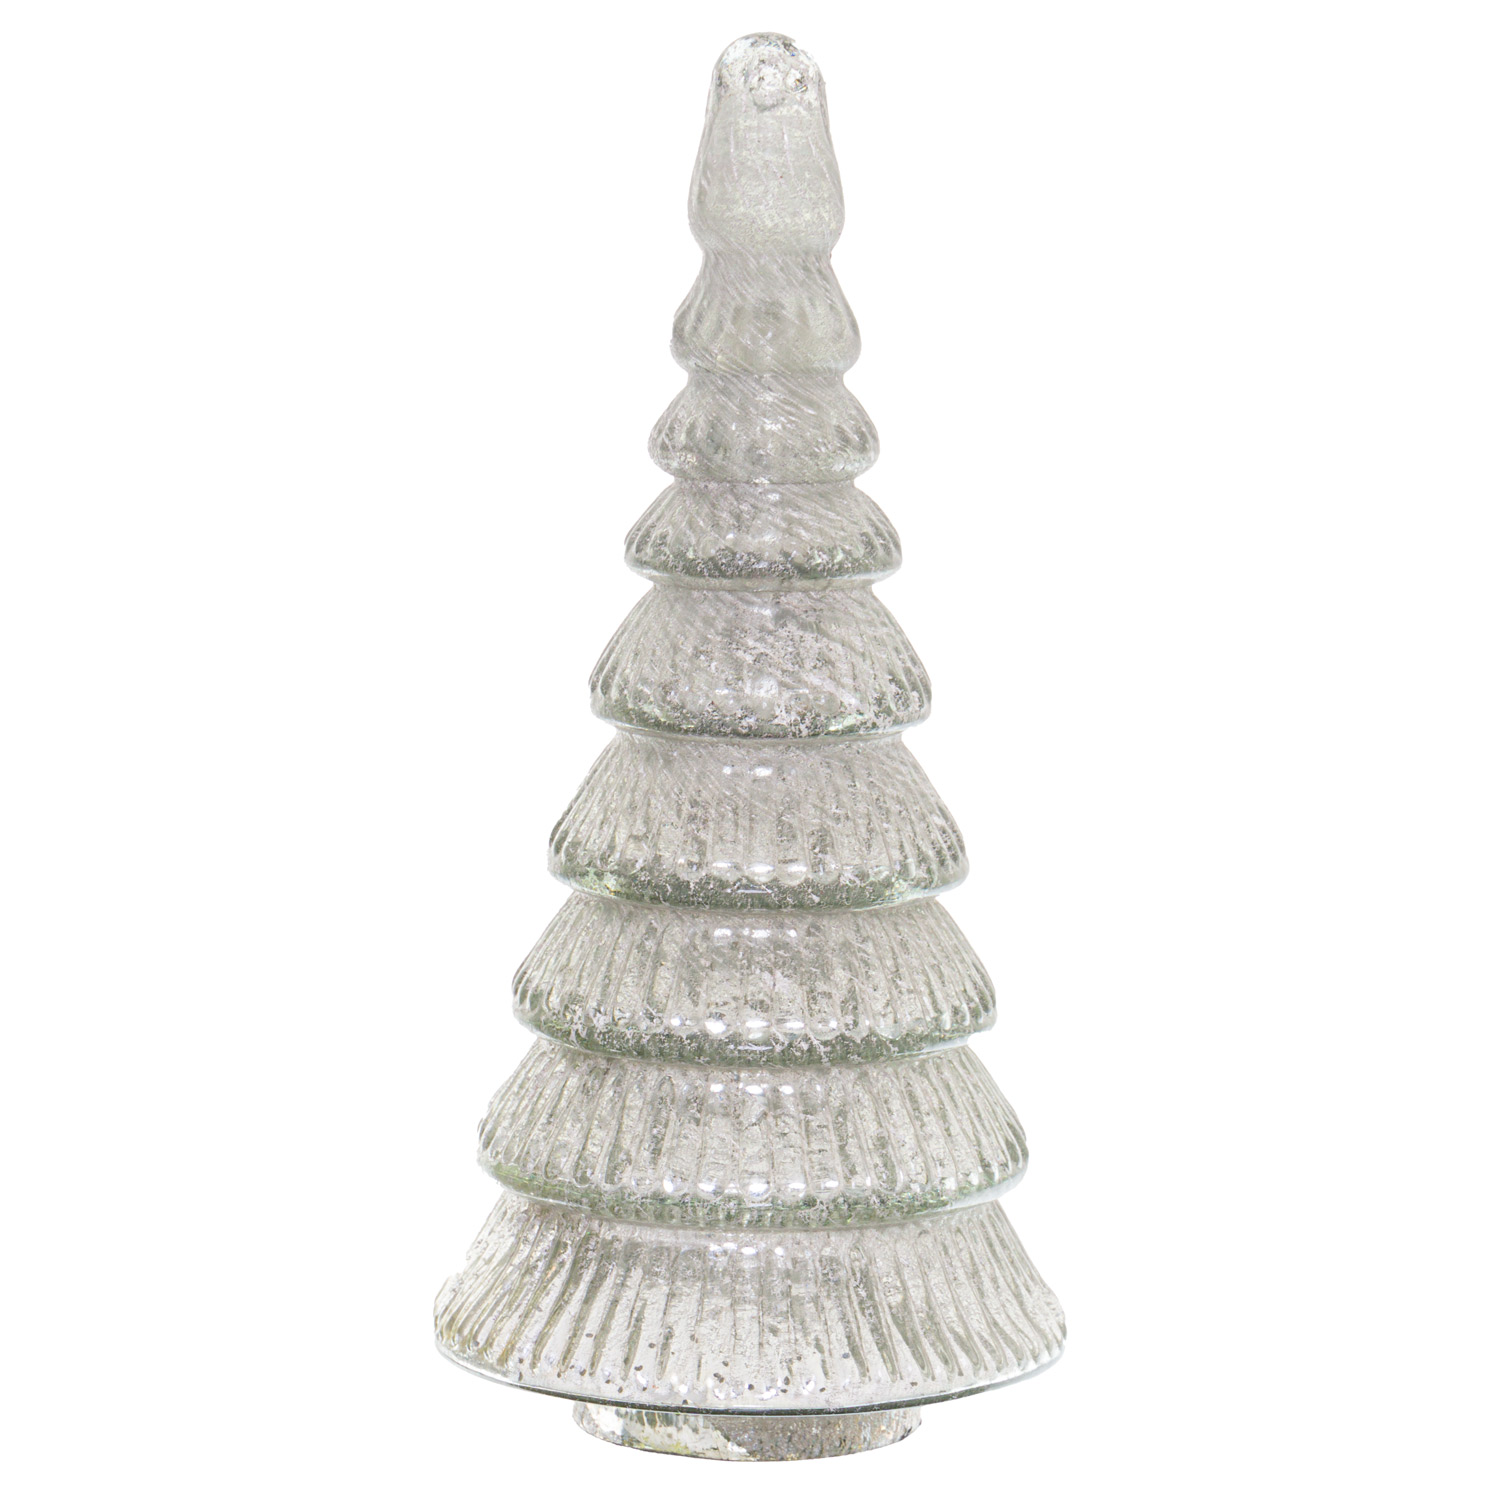 The Noel Collection Tiered Decorative Medium Glass Tree - Image 1